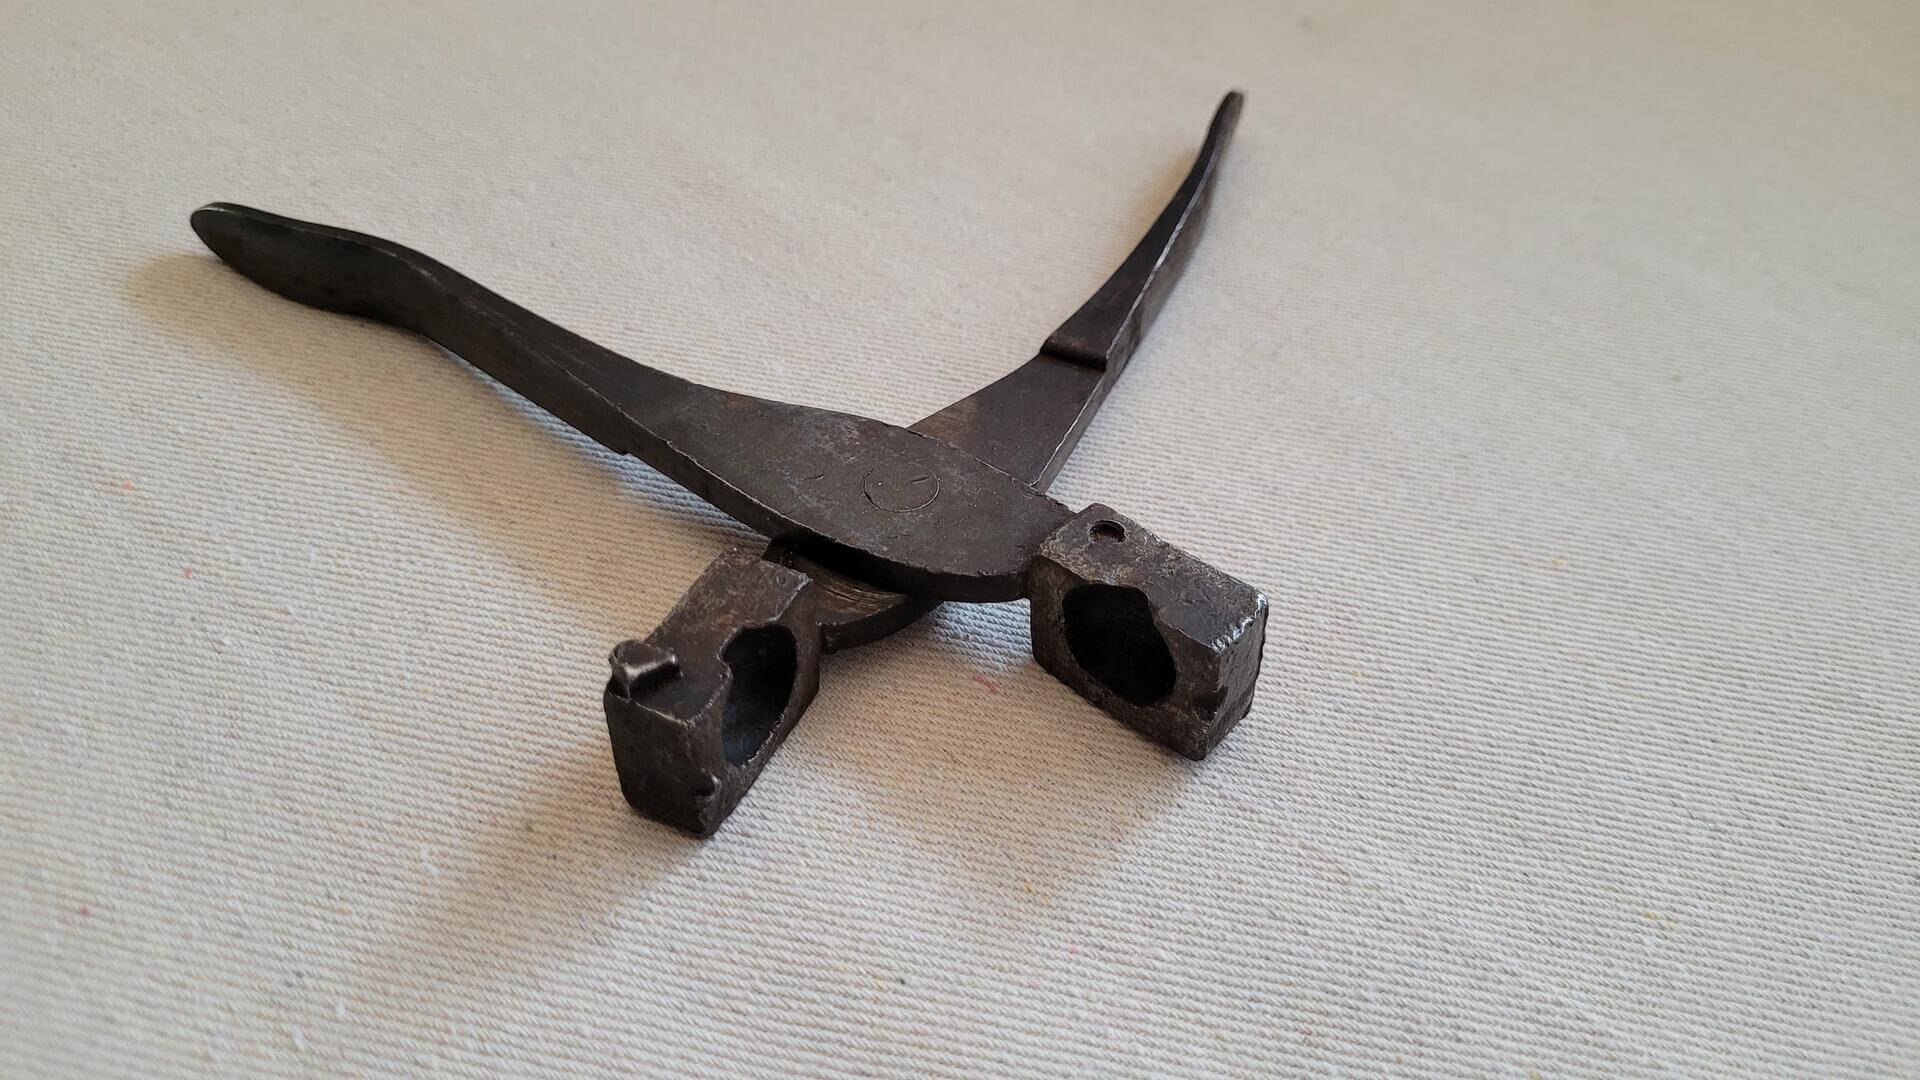 Rare vintage blacksmith lead musket ball pliers 7 inches long. 19th century primitive collectible forging hand tools and war memorabilia